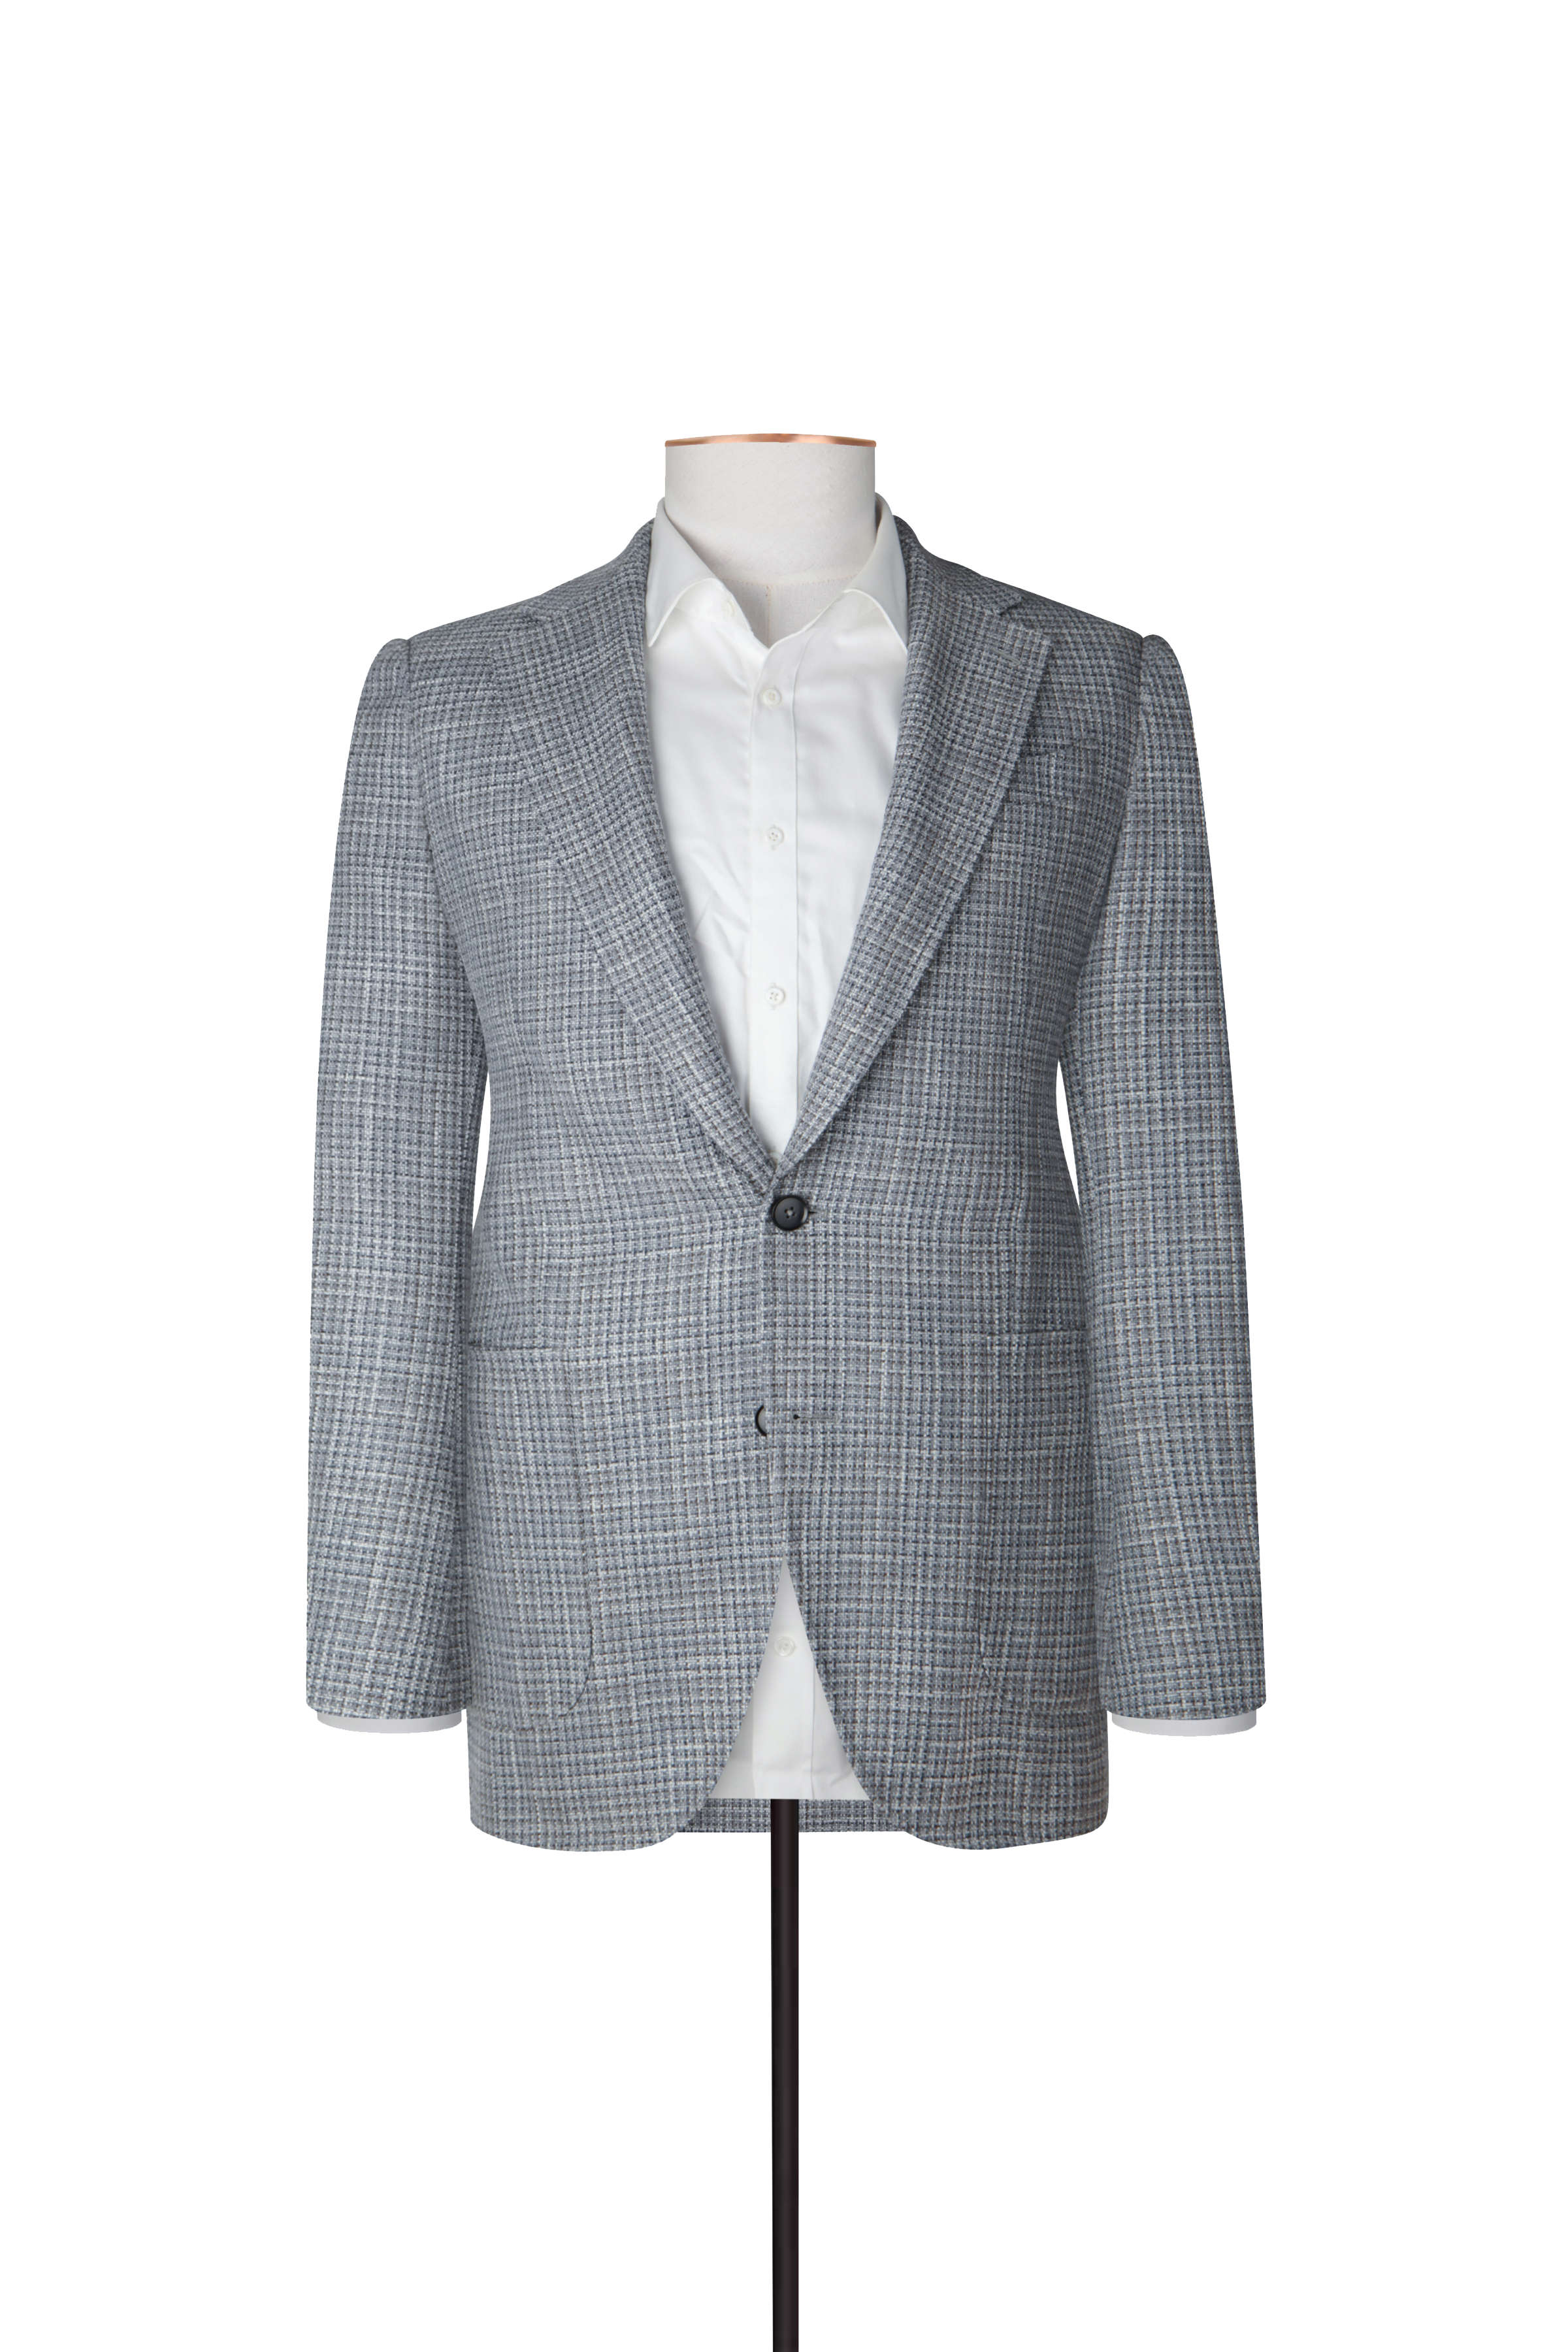 Loro Piana Blue & Neutral Checked Unstructured Blazer by Knot Standard